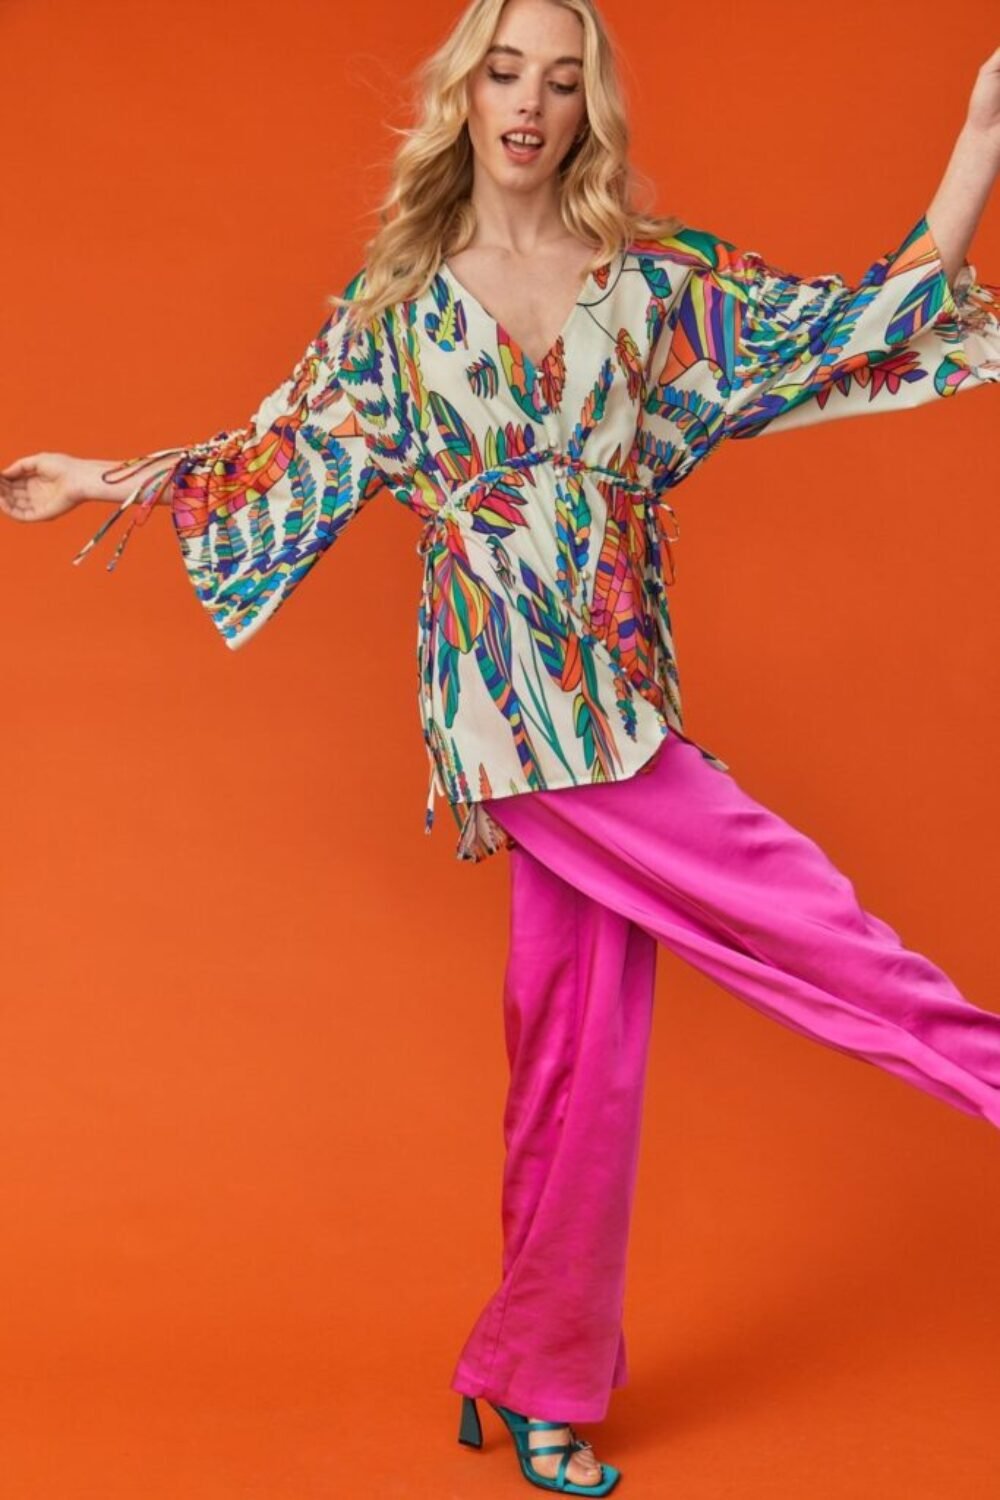 Shop Lux Havanna Tropical V-Neck Print Tunic and women's luxury and designer clothes at www.lux-apparel.co.uk